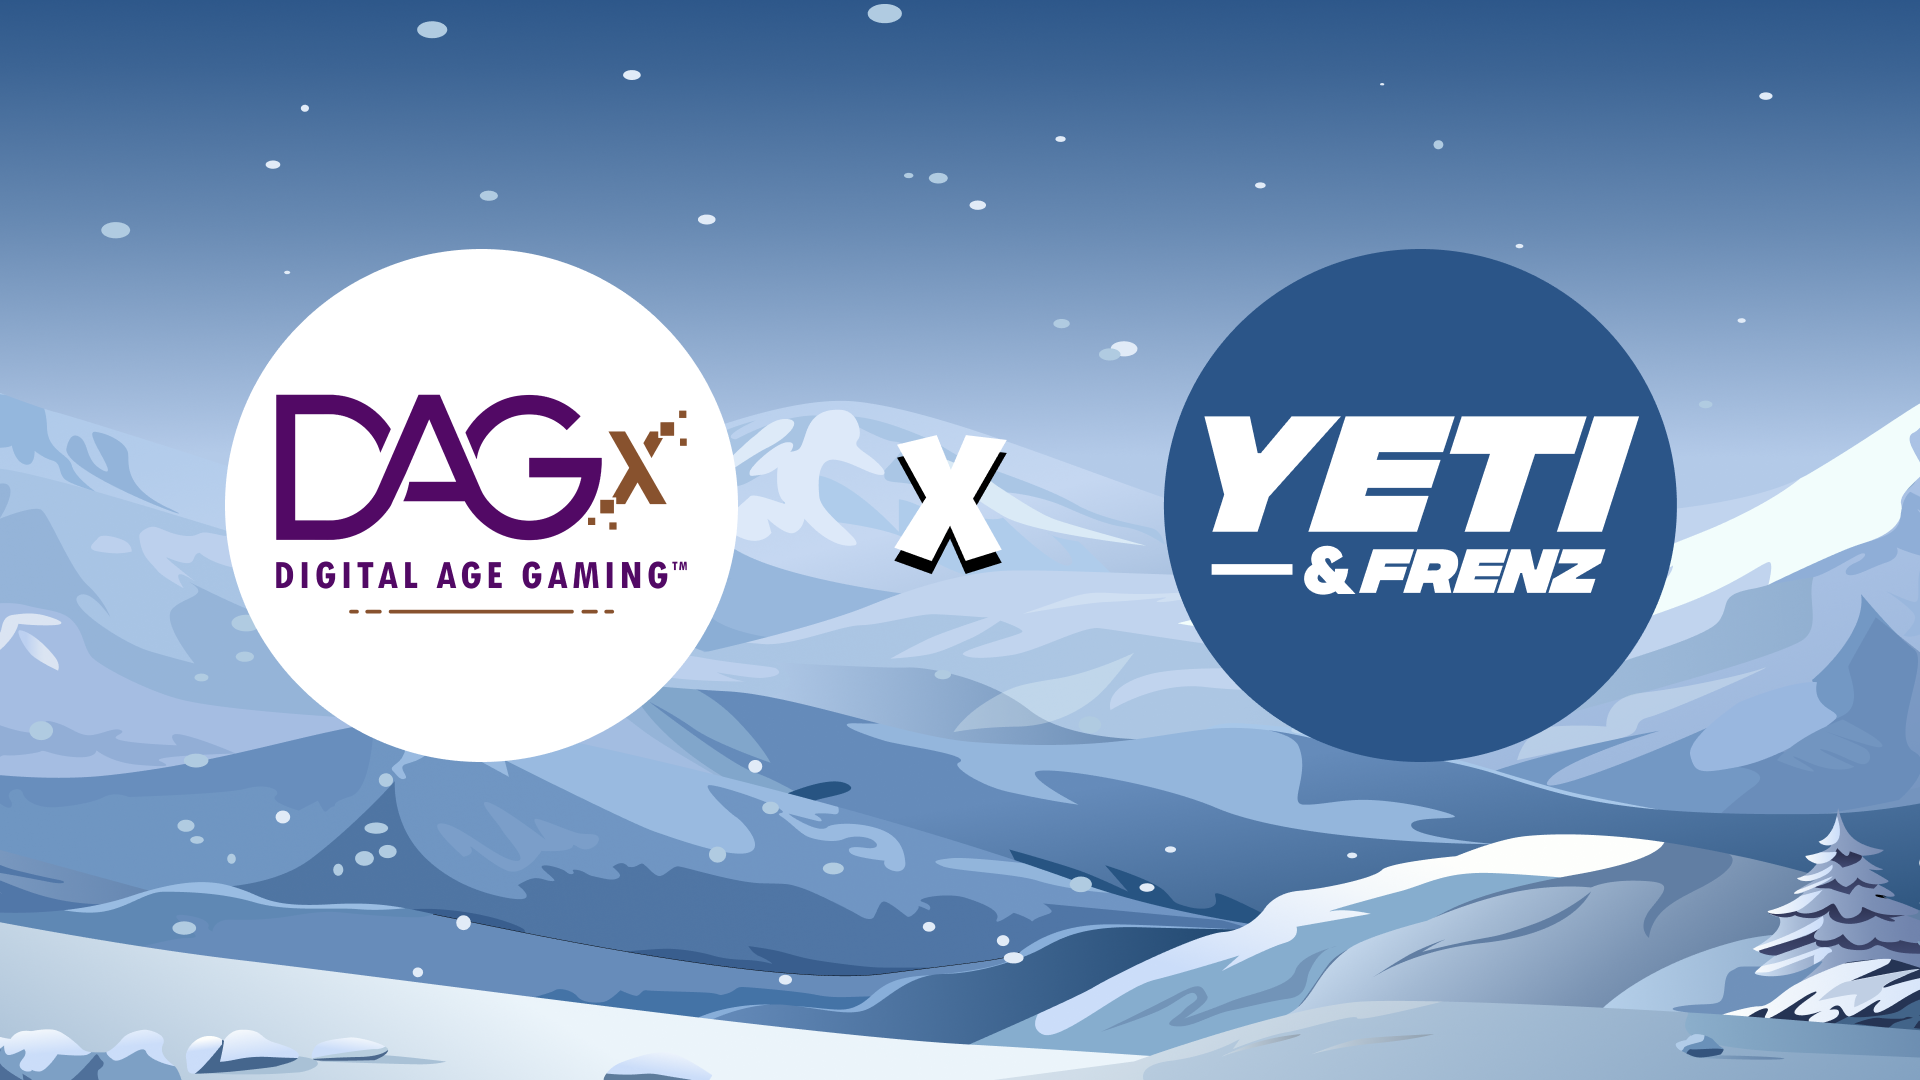 New Partnership: DAGx and Yeti & Frenz Join Forces